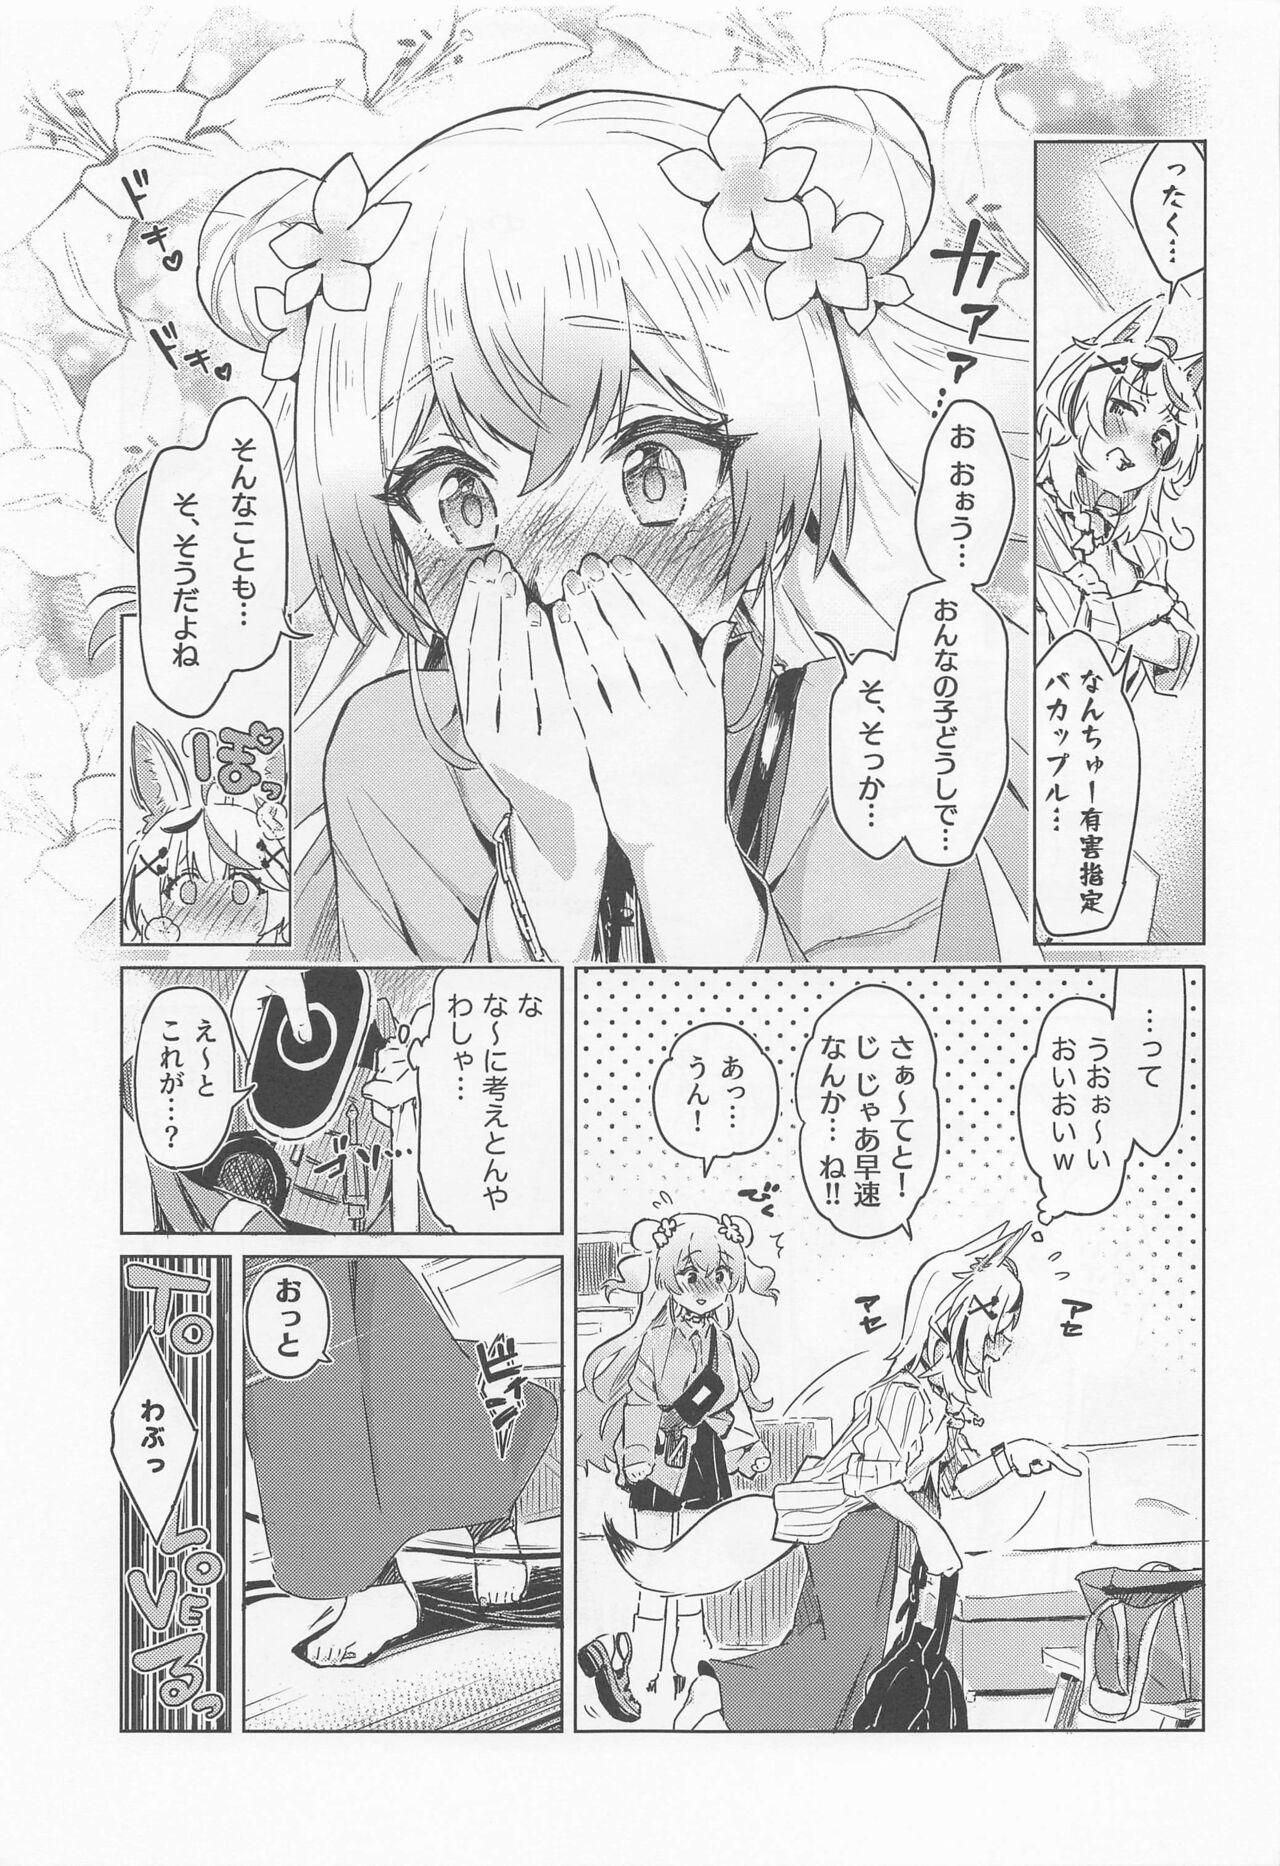 Hardcore Porno Fennec wa Iseijin no Yume o Miru ka - Does The Fennec Dream of The Lovely Visitor? - Hololive Cruising - Page 10